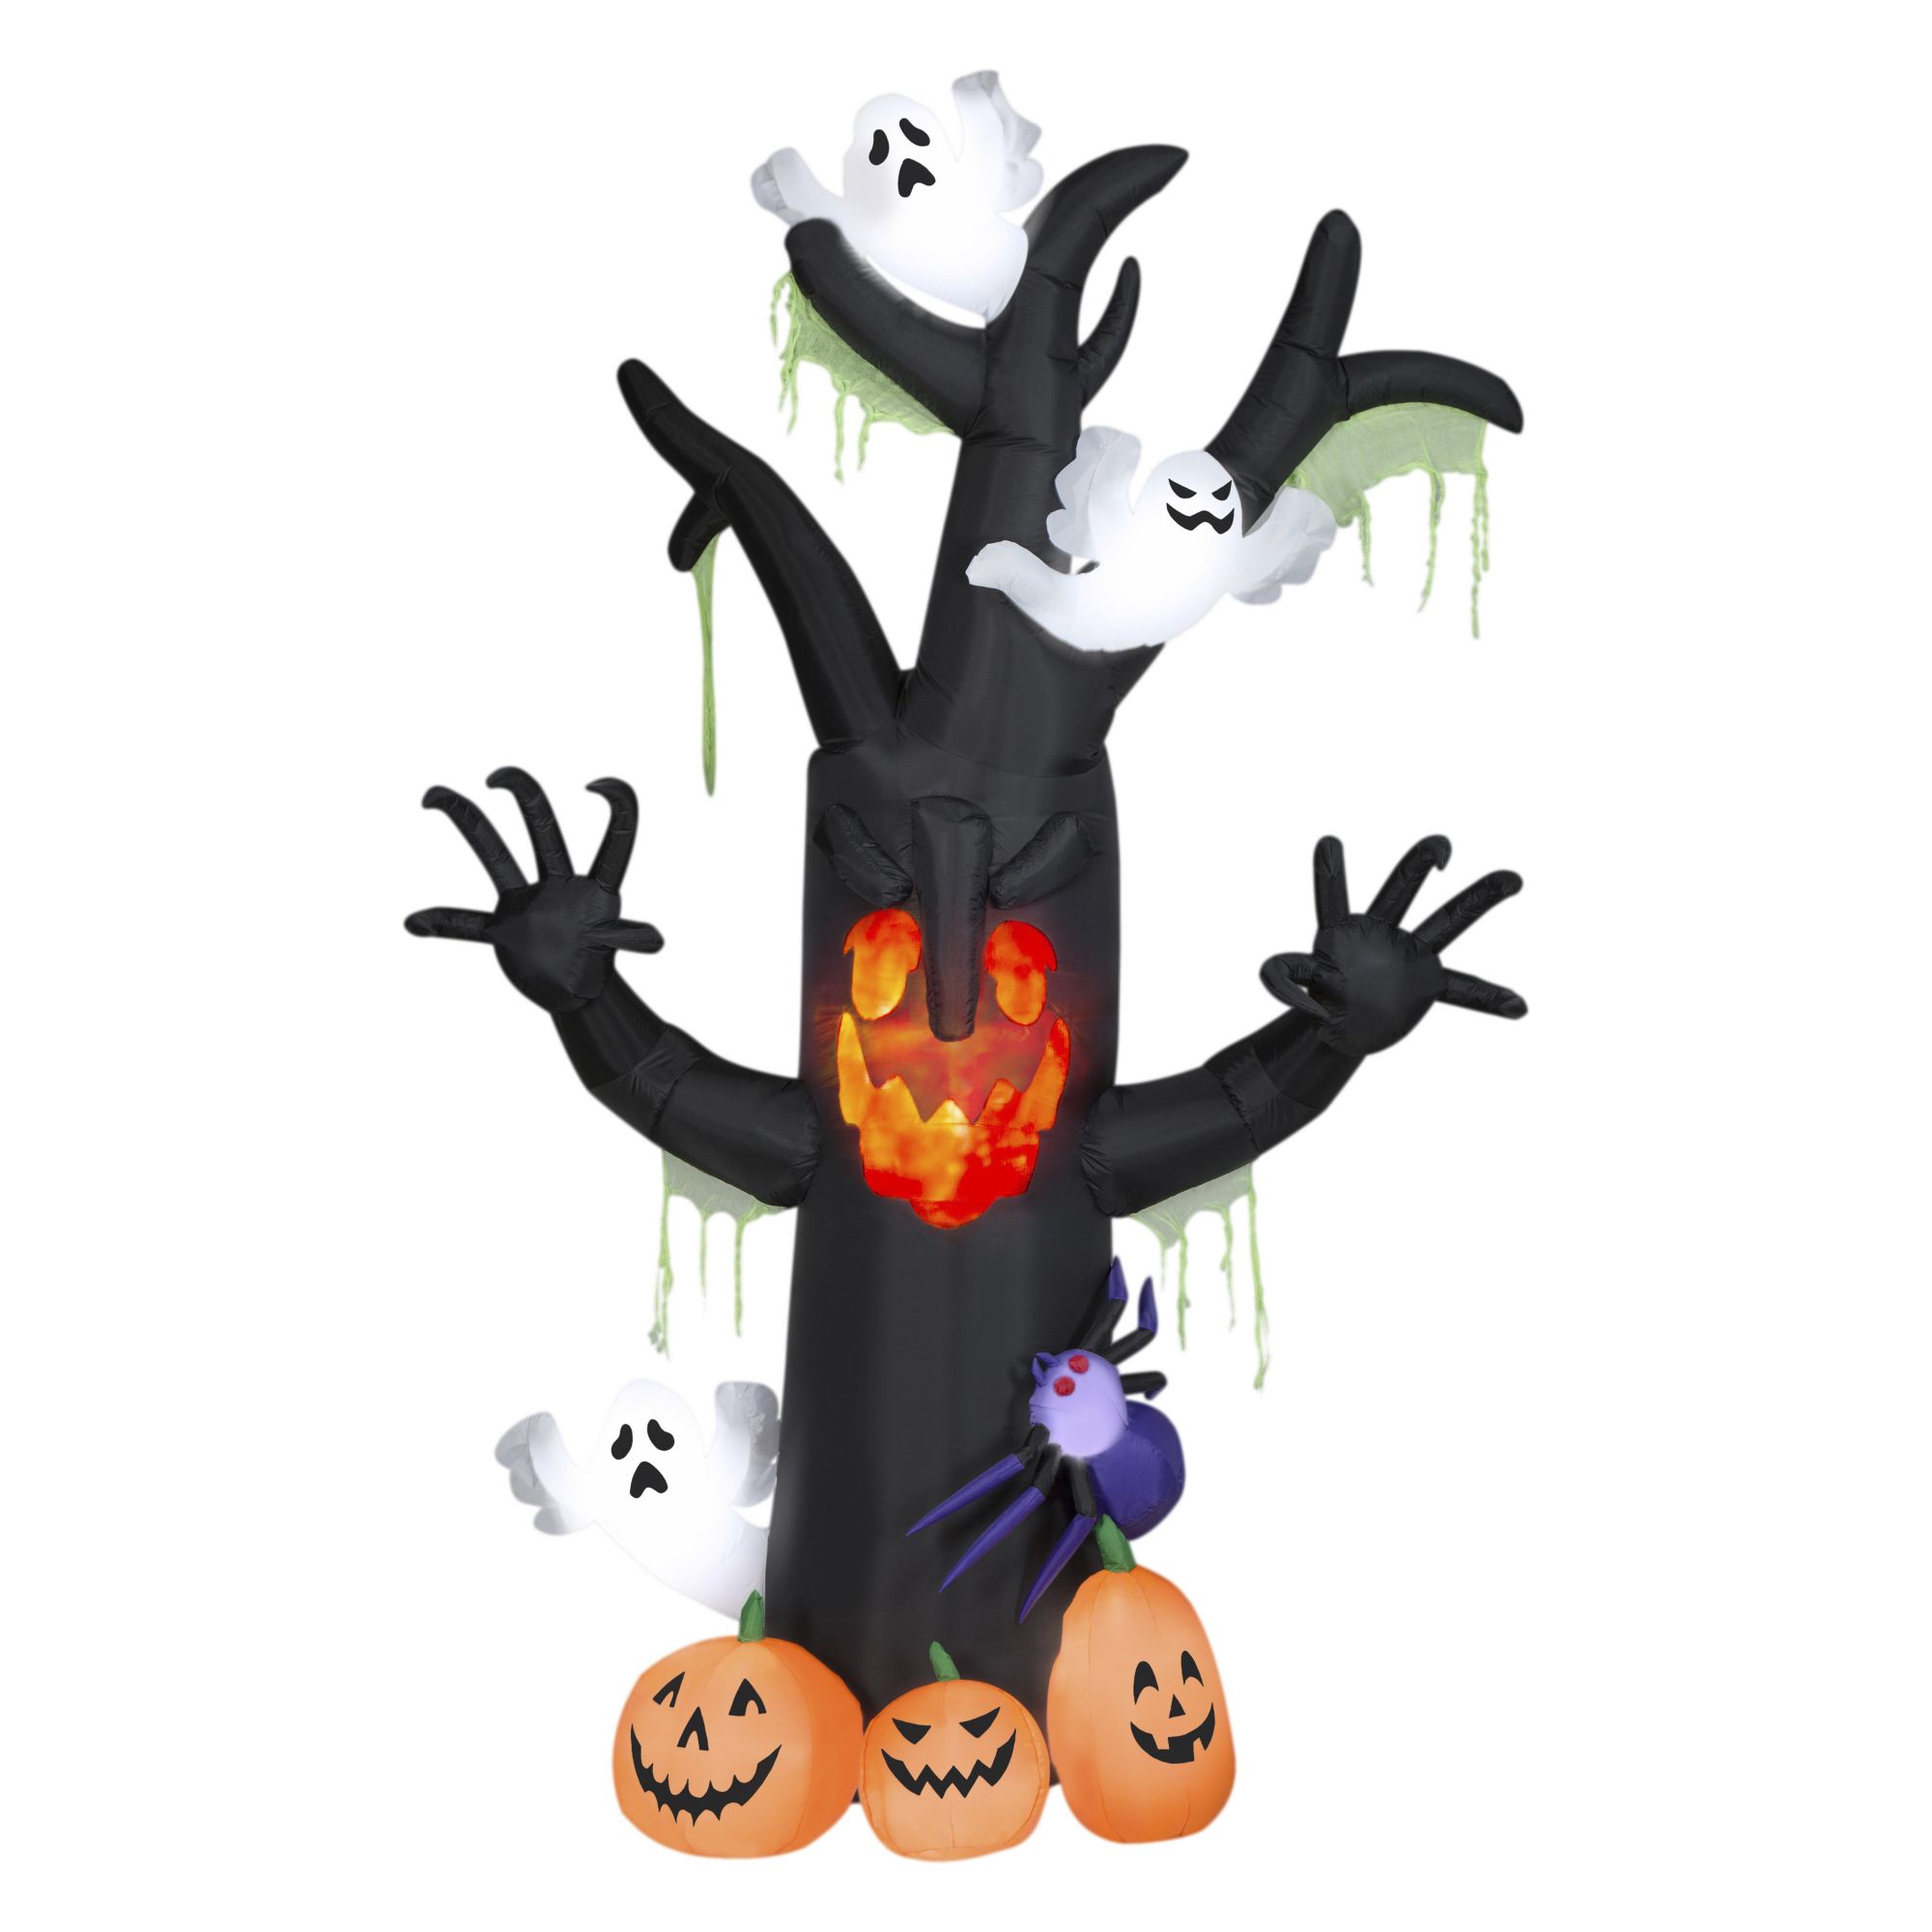 Gemmy 10' Inflatable Haunted Tree and Ghosts | BJ's Wholesale Club